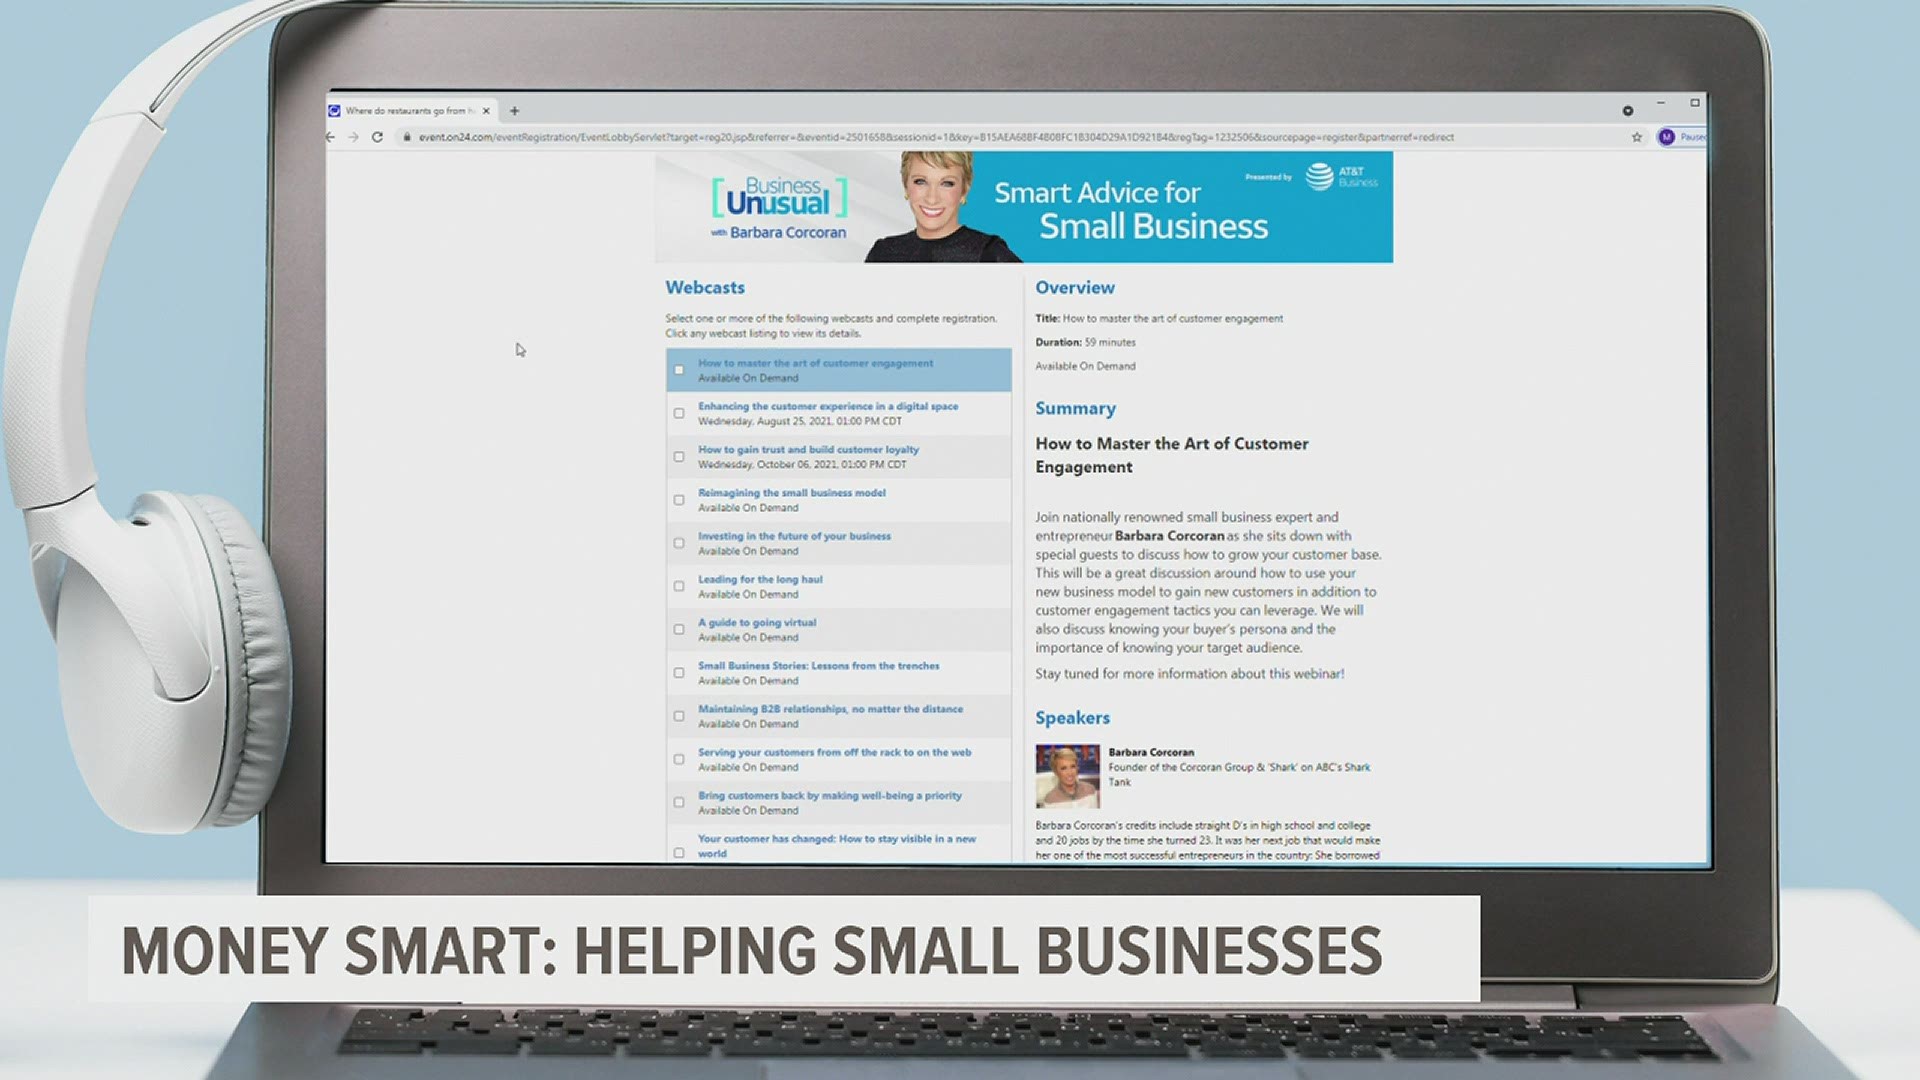 Businesswoman and Shark Tank star, Barbara Corcoran is offering a free webinar series to small business owners who are struggling to bounce back post-COVID.